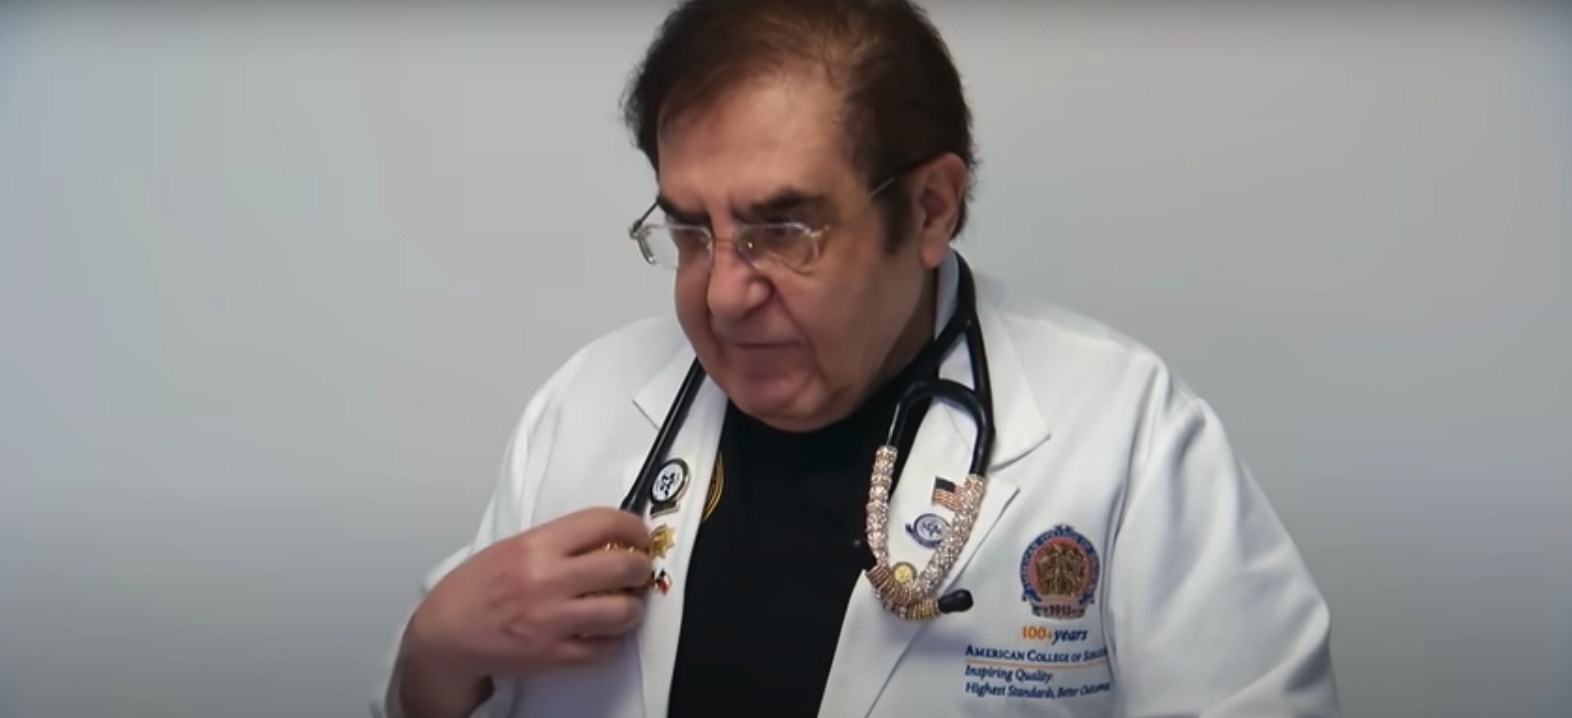 Dr. Now from 'My 600-lb Life' Season 11 on TLC with a stethoscope around his neck